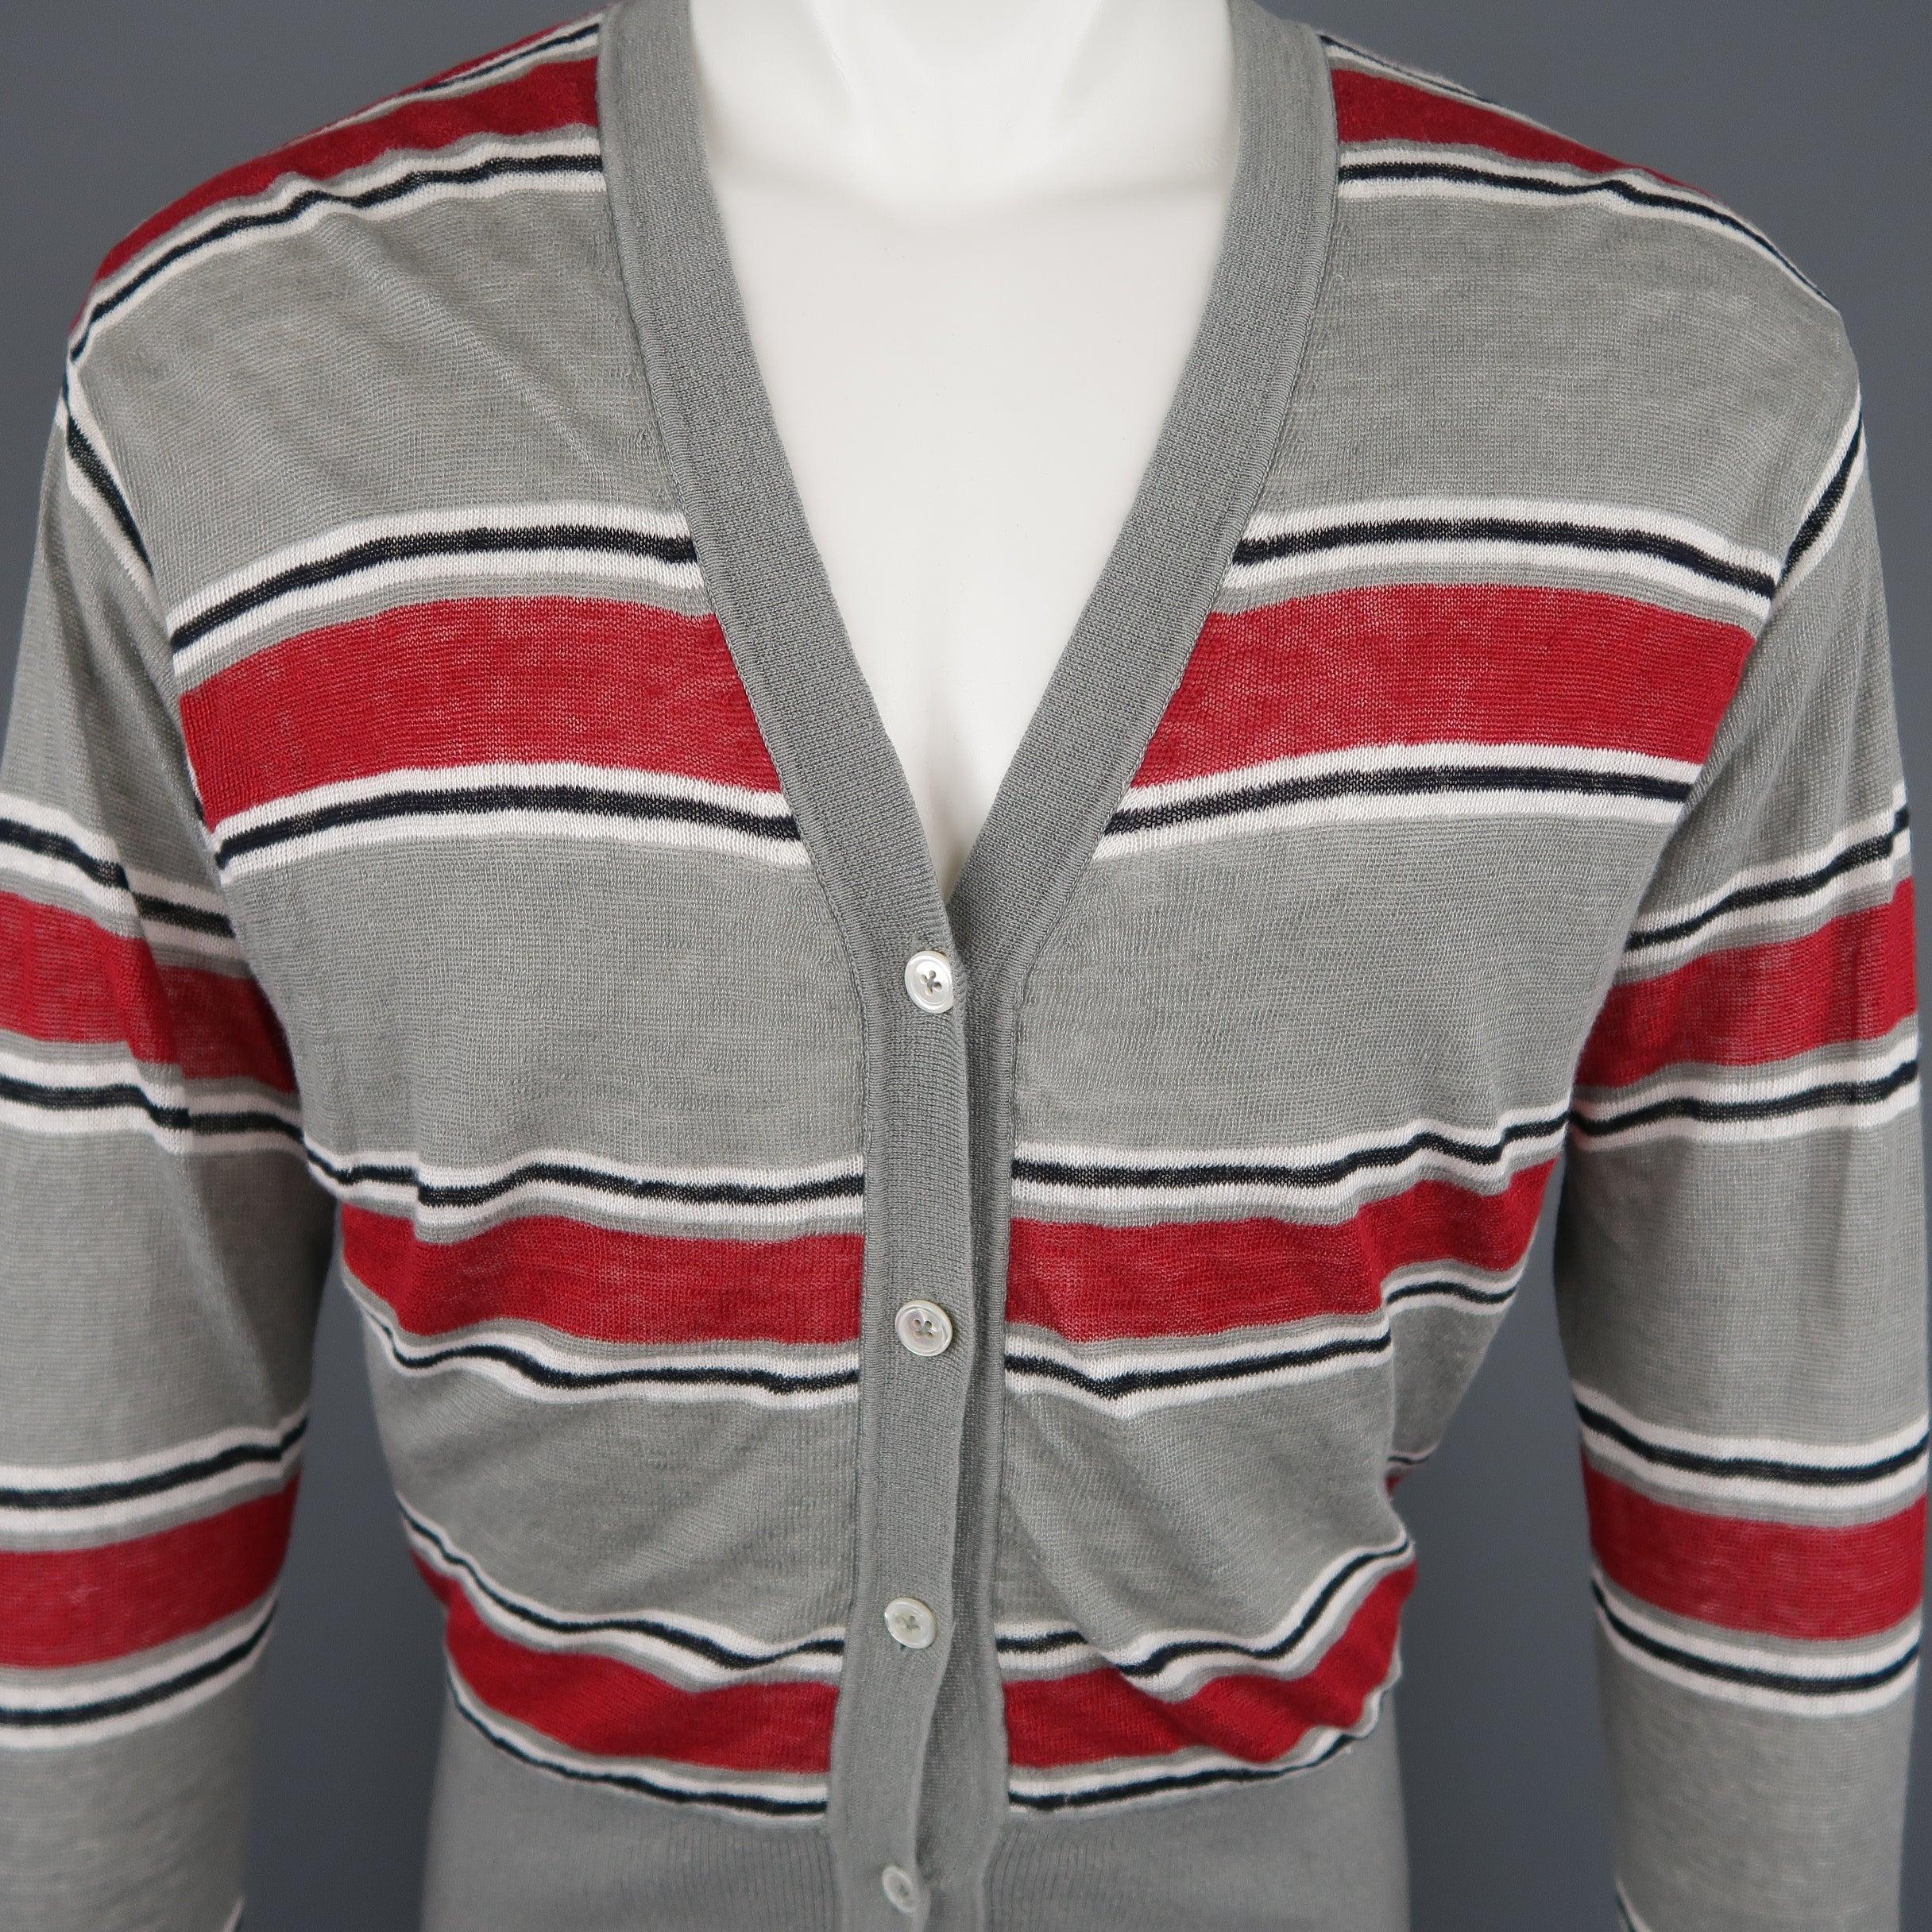 BLACK FLEECE cardigan comes in red and gray striped knit with a deep v neck button up front and white mesh overlay reverse side.
Excellent Pre-Owned Condition. 

Marked:   (no size) 

Measurements: 
 
Shoulder: 21 inches Chest: 48 inches Sleeve: 27